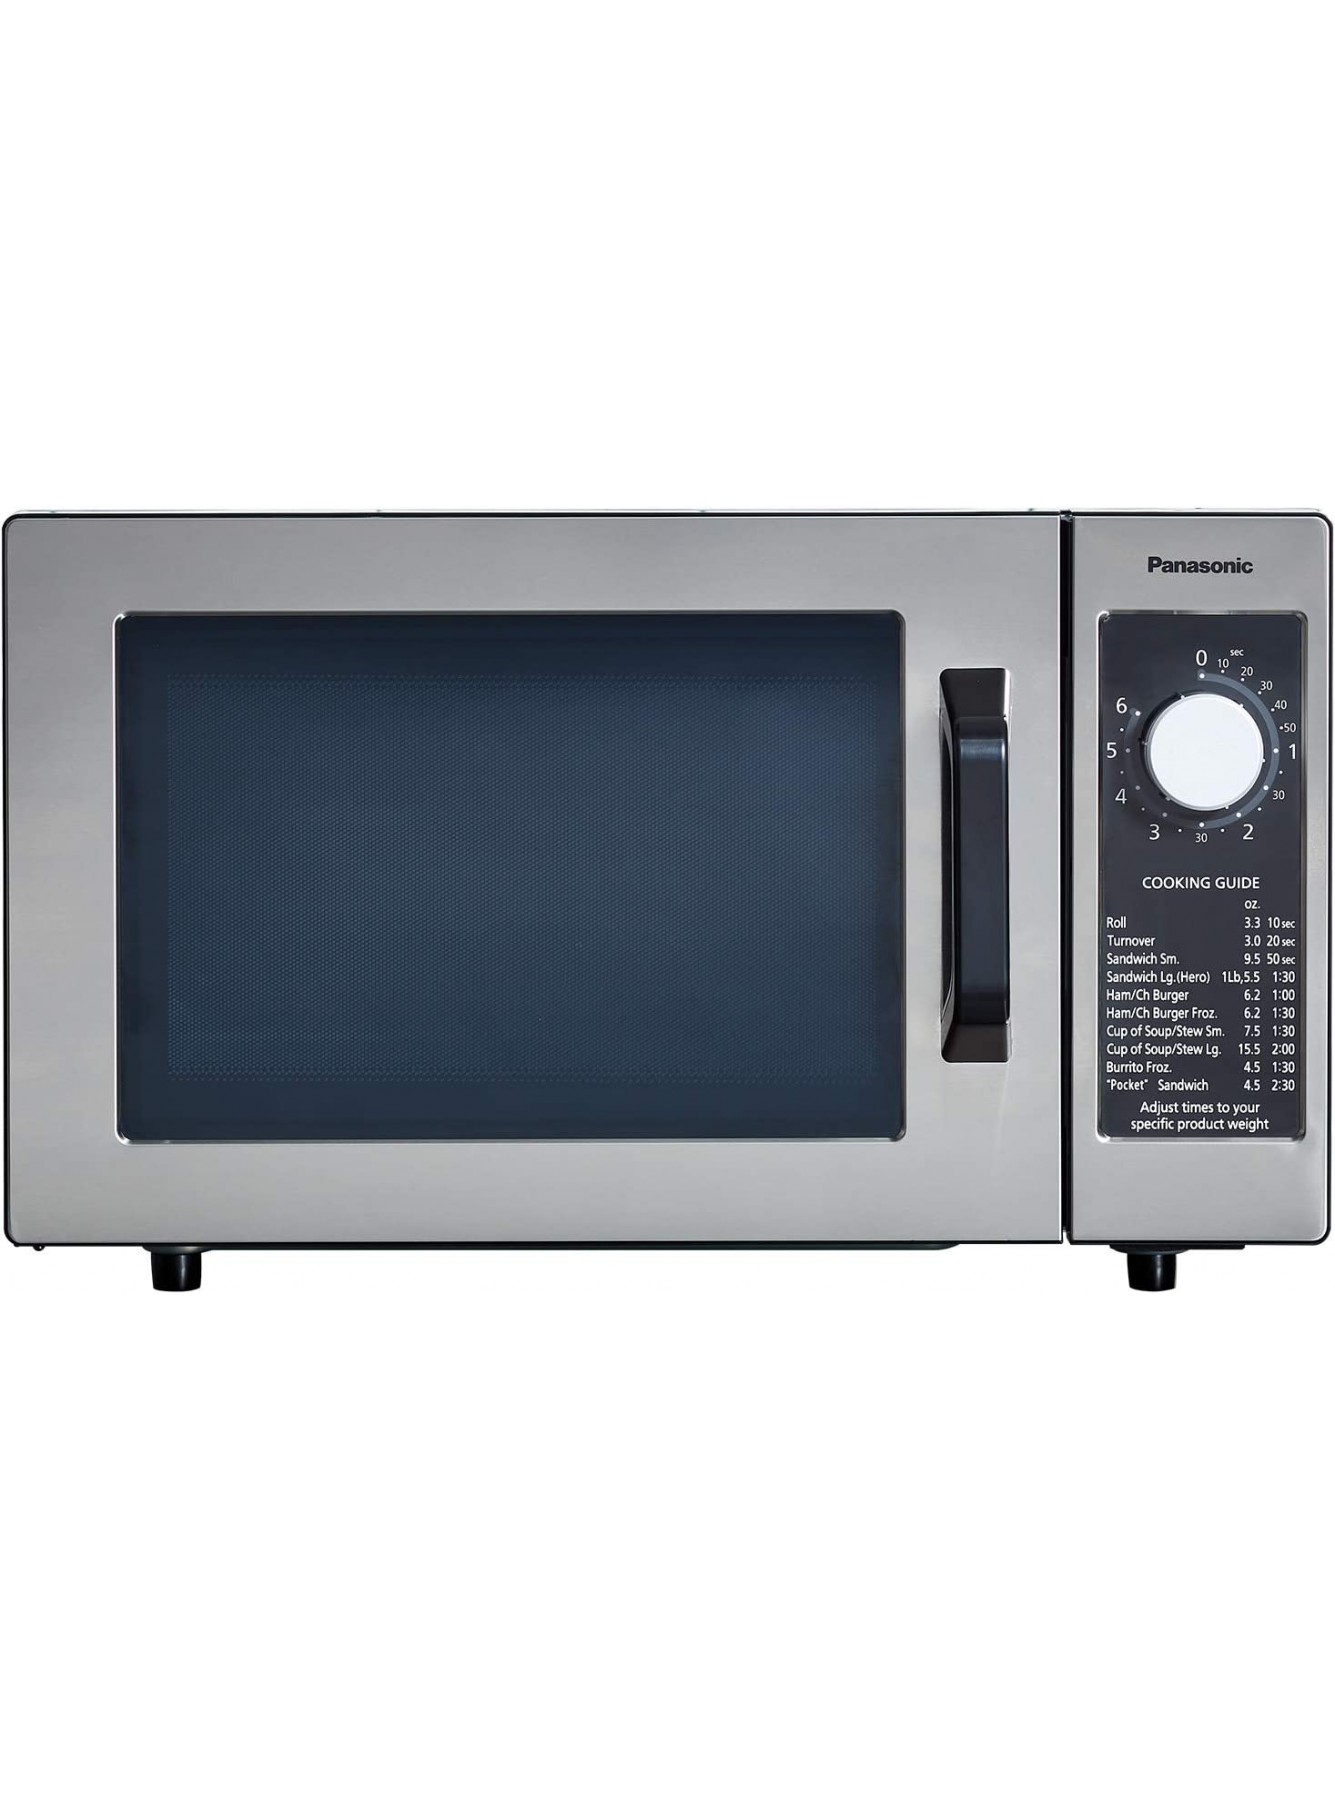 Panasonic NE-1025F Compact Light-Duty Countertop Commercial Microwave Oven with 6-Minute Electronic Dial Control Timer Bottom Energy Feed 1000W 0.8 Cu. Ft. Capacity Silver B00ZTVIPZ2